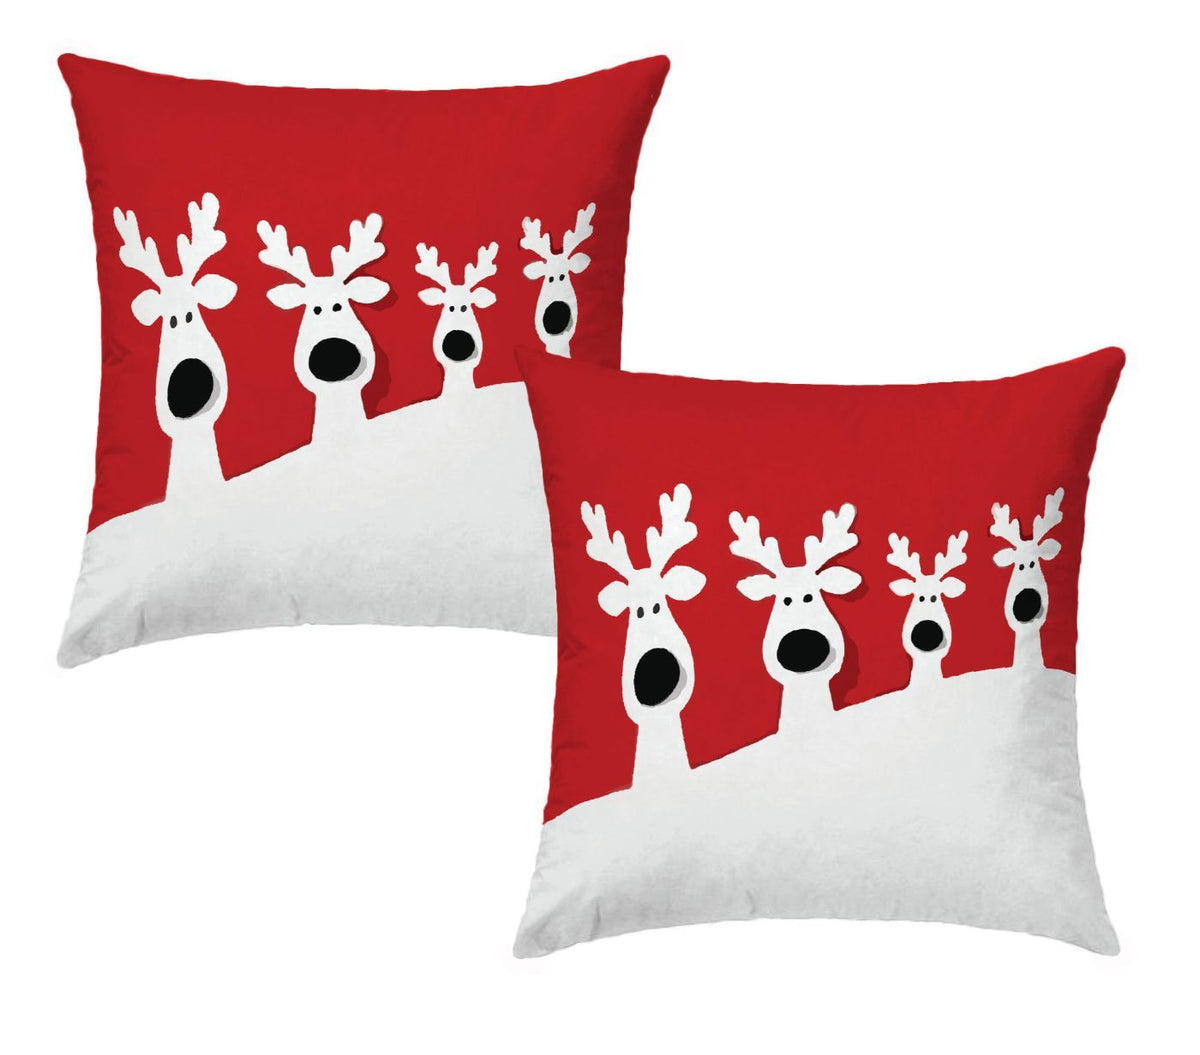 Pair of Cushion Covers for Furniture cm. 40x40 - CURIOUS REINDEER